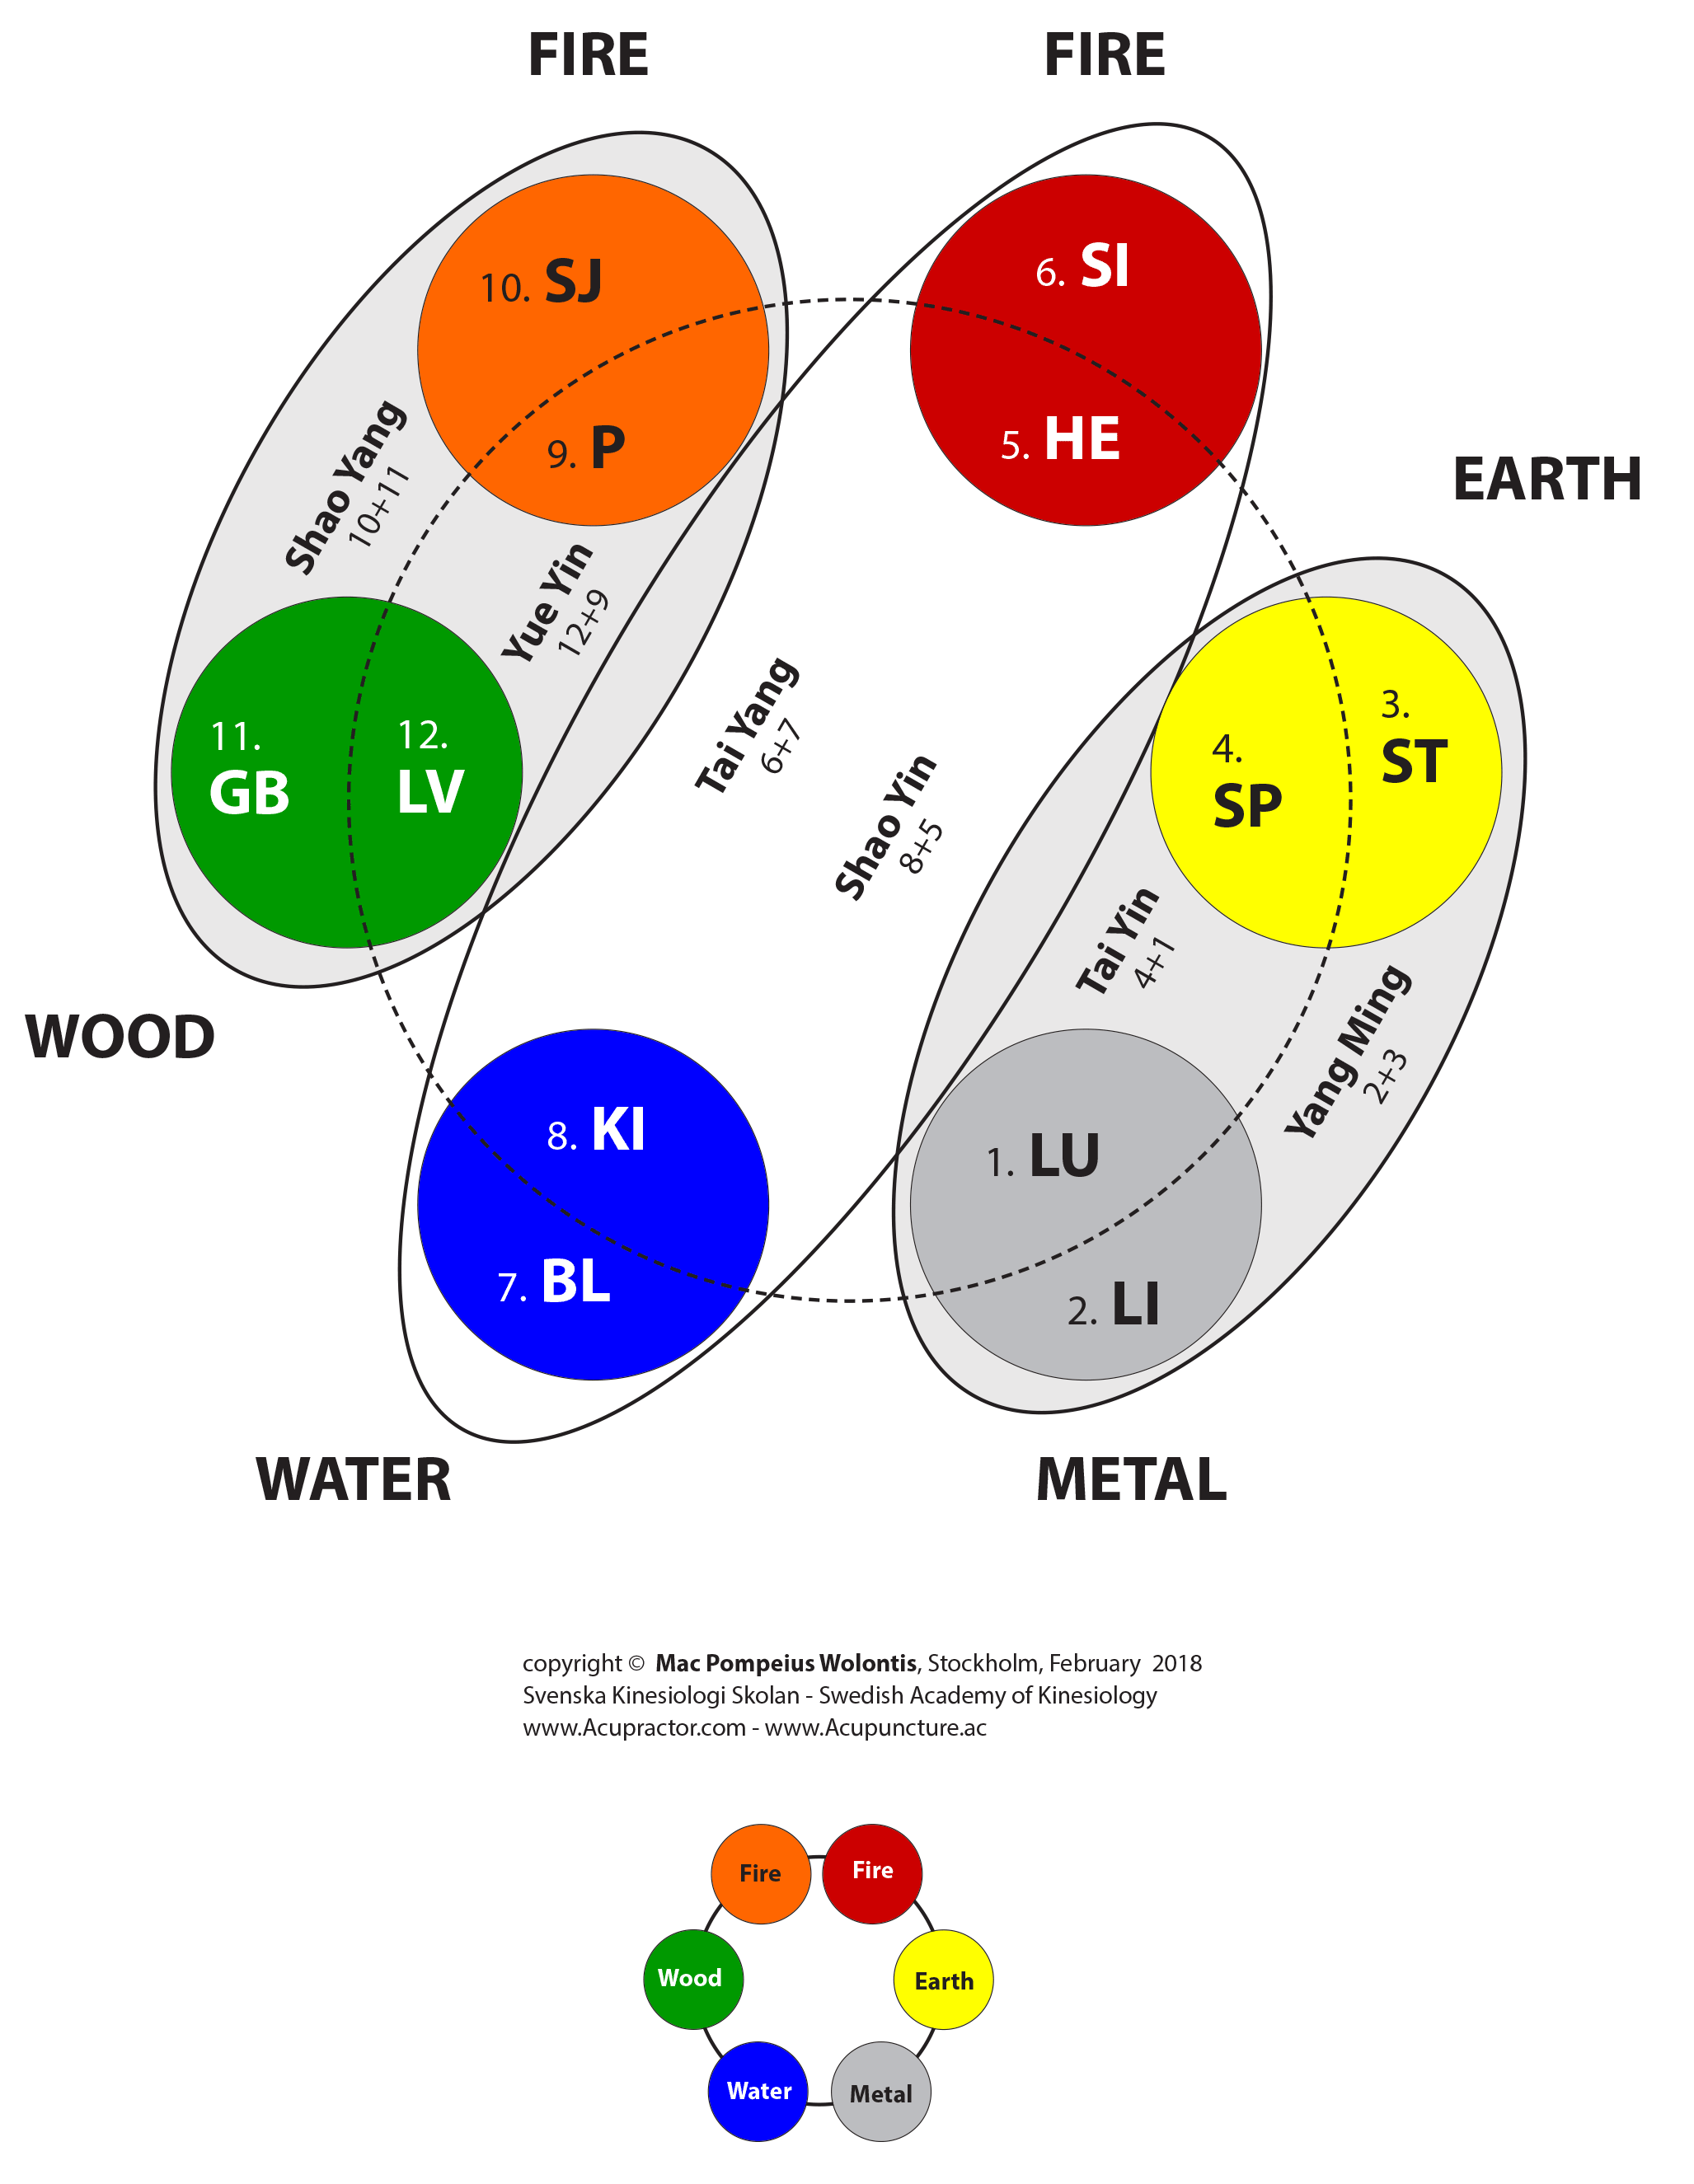  The New 5 Element Chart  by Mac Pompeius Wolontis 